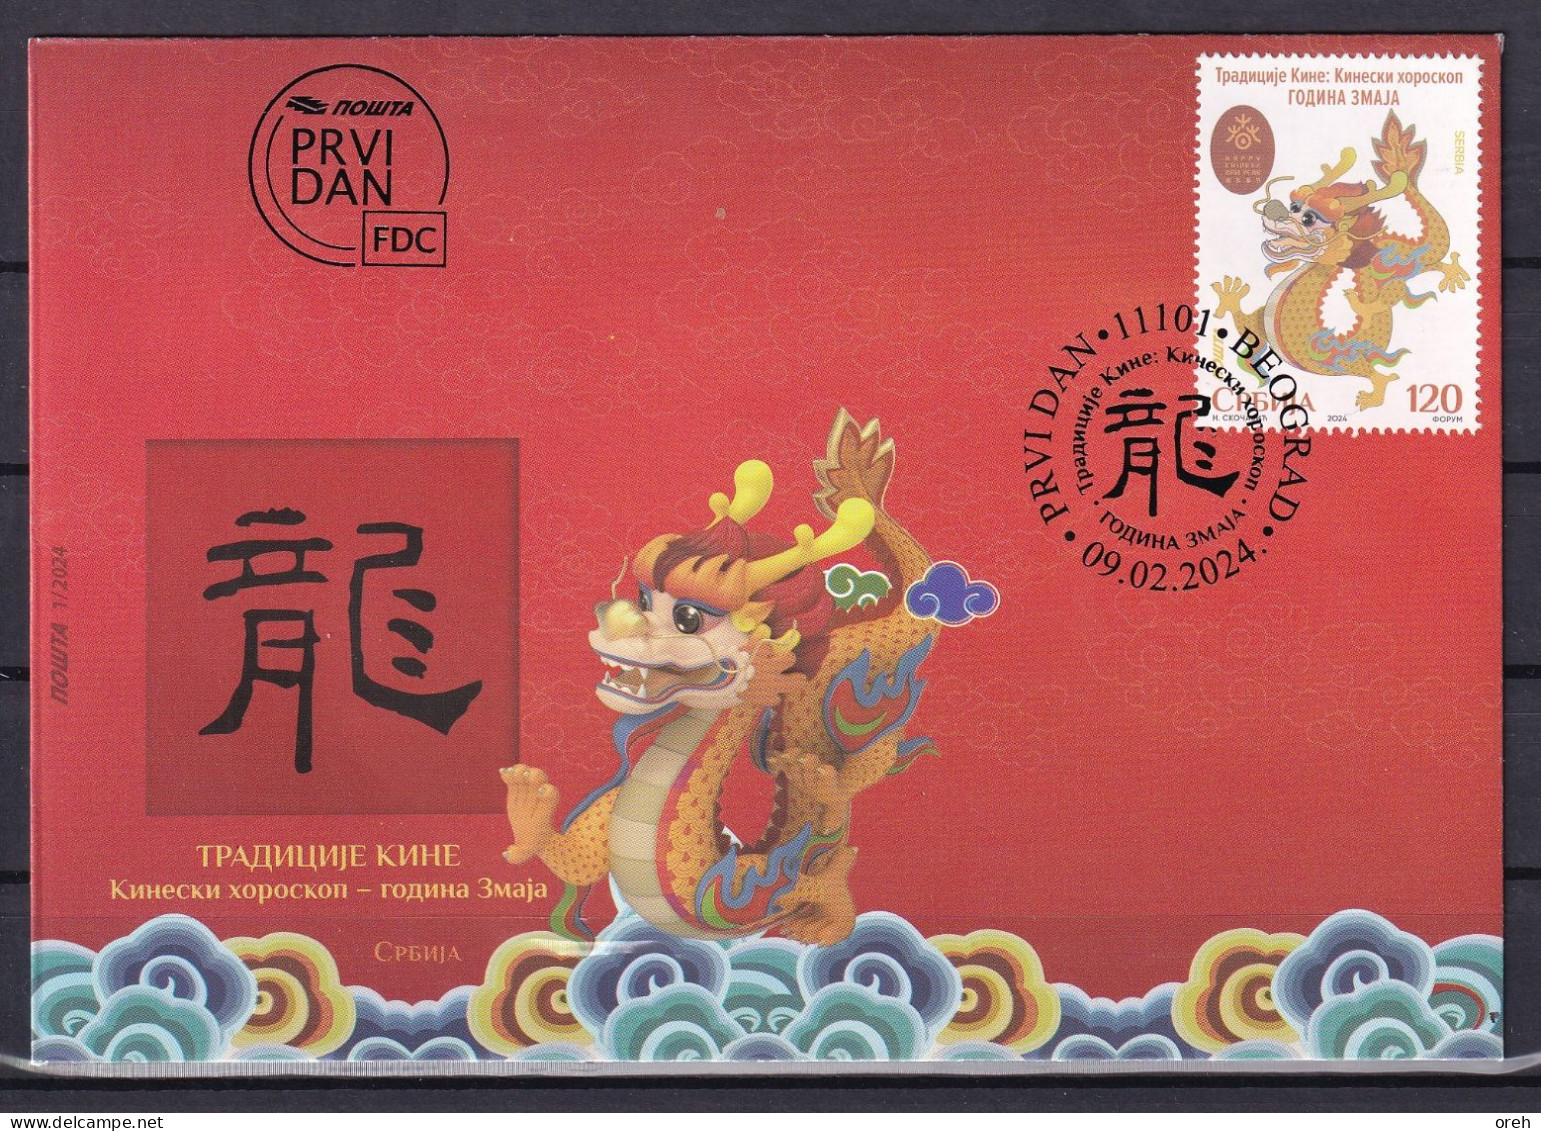 SERBIA 2024,CHINESE LUNAR  NEW YEAR,YEAR  OF THE DRAGON,LOONG,ZODIAK,MNH - Año Nuevo Chino